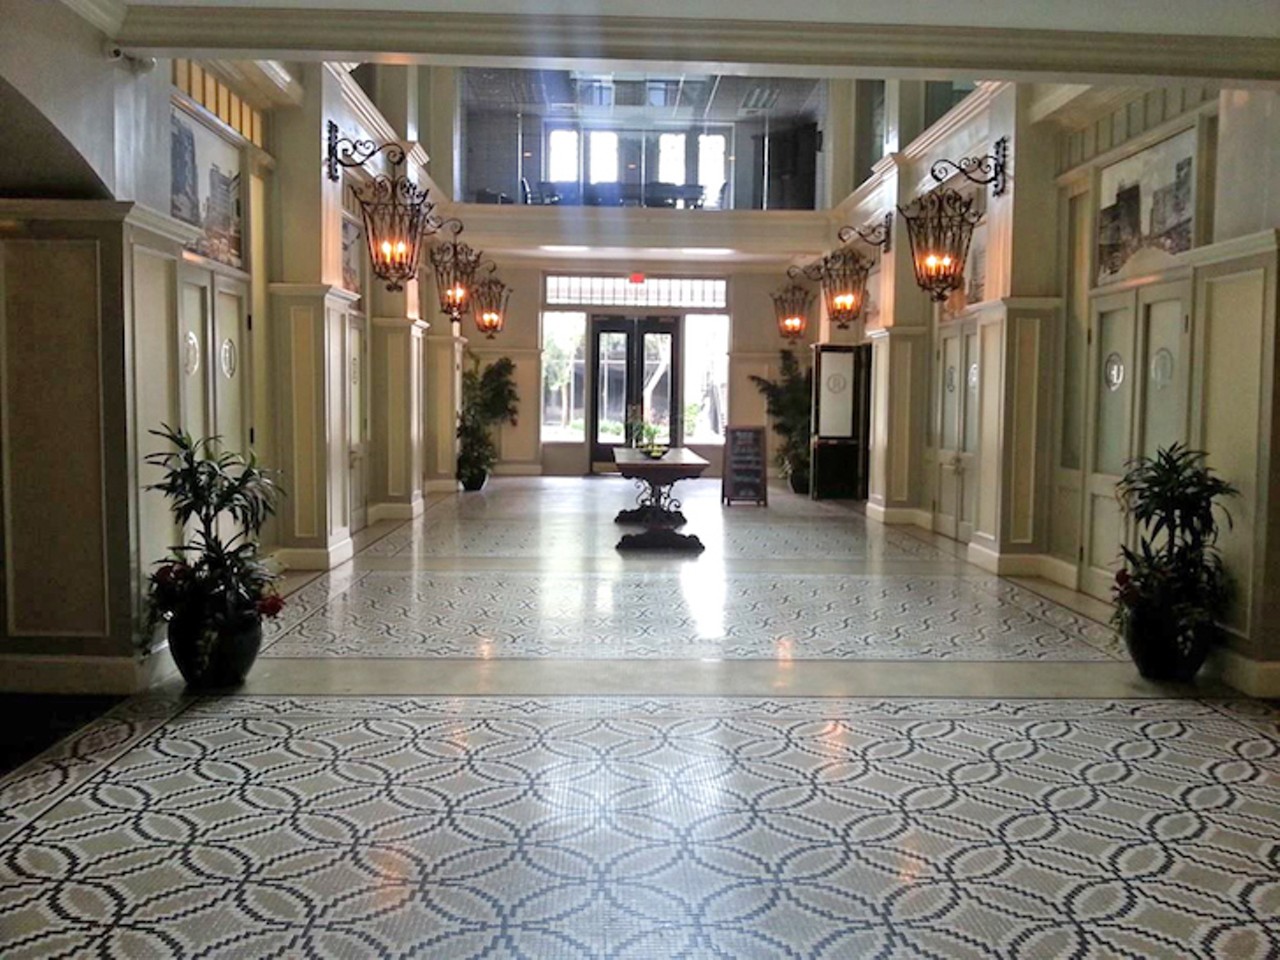 Lobby at the Historic Angebilt Hotel 
37 N. Orange Ave.
The historic hotel built in the 1920s is not only picturesque from its vintage brick exterior, but its elegantly posh lobby.
Photo via The Angebilt/Facebook